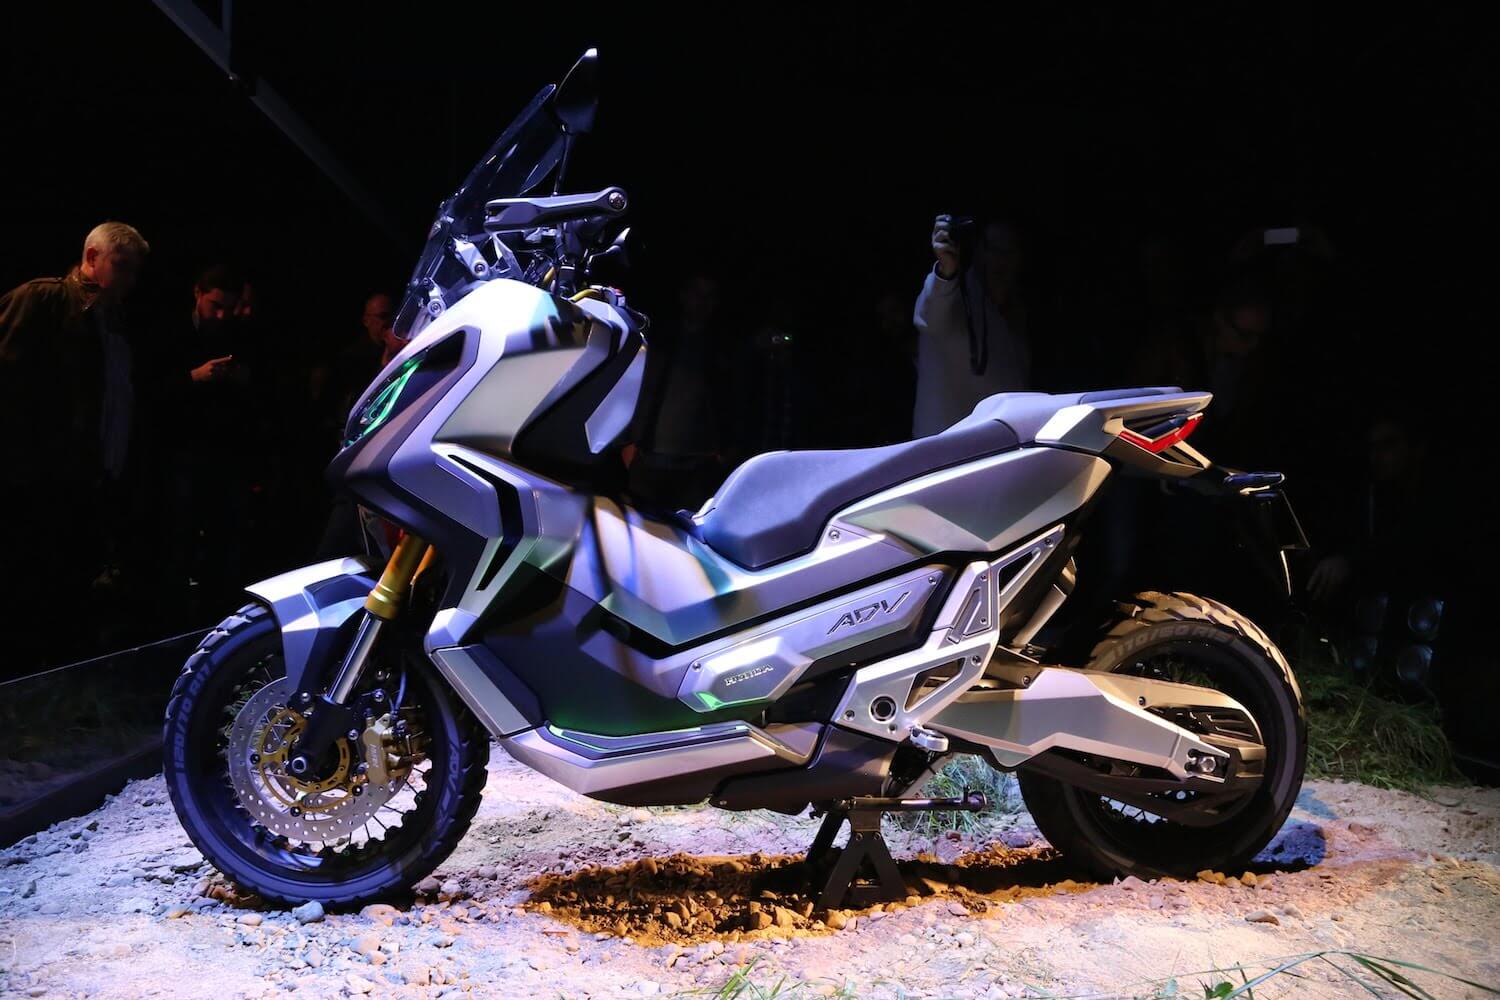 Honda X-ADV Scooter/Motorcycle Hybrid Confirmed For 2017